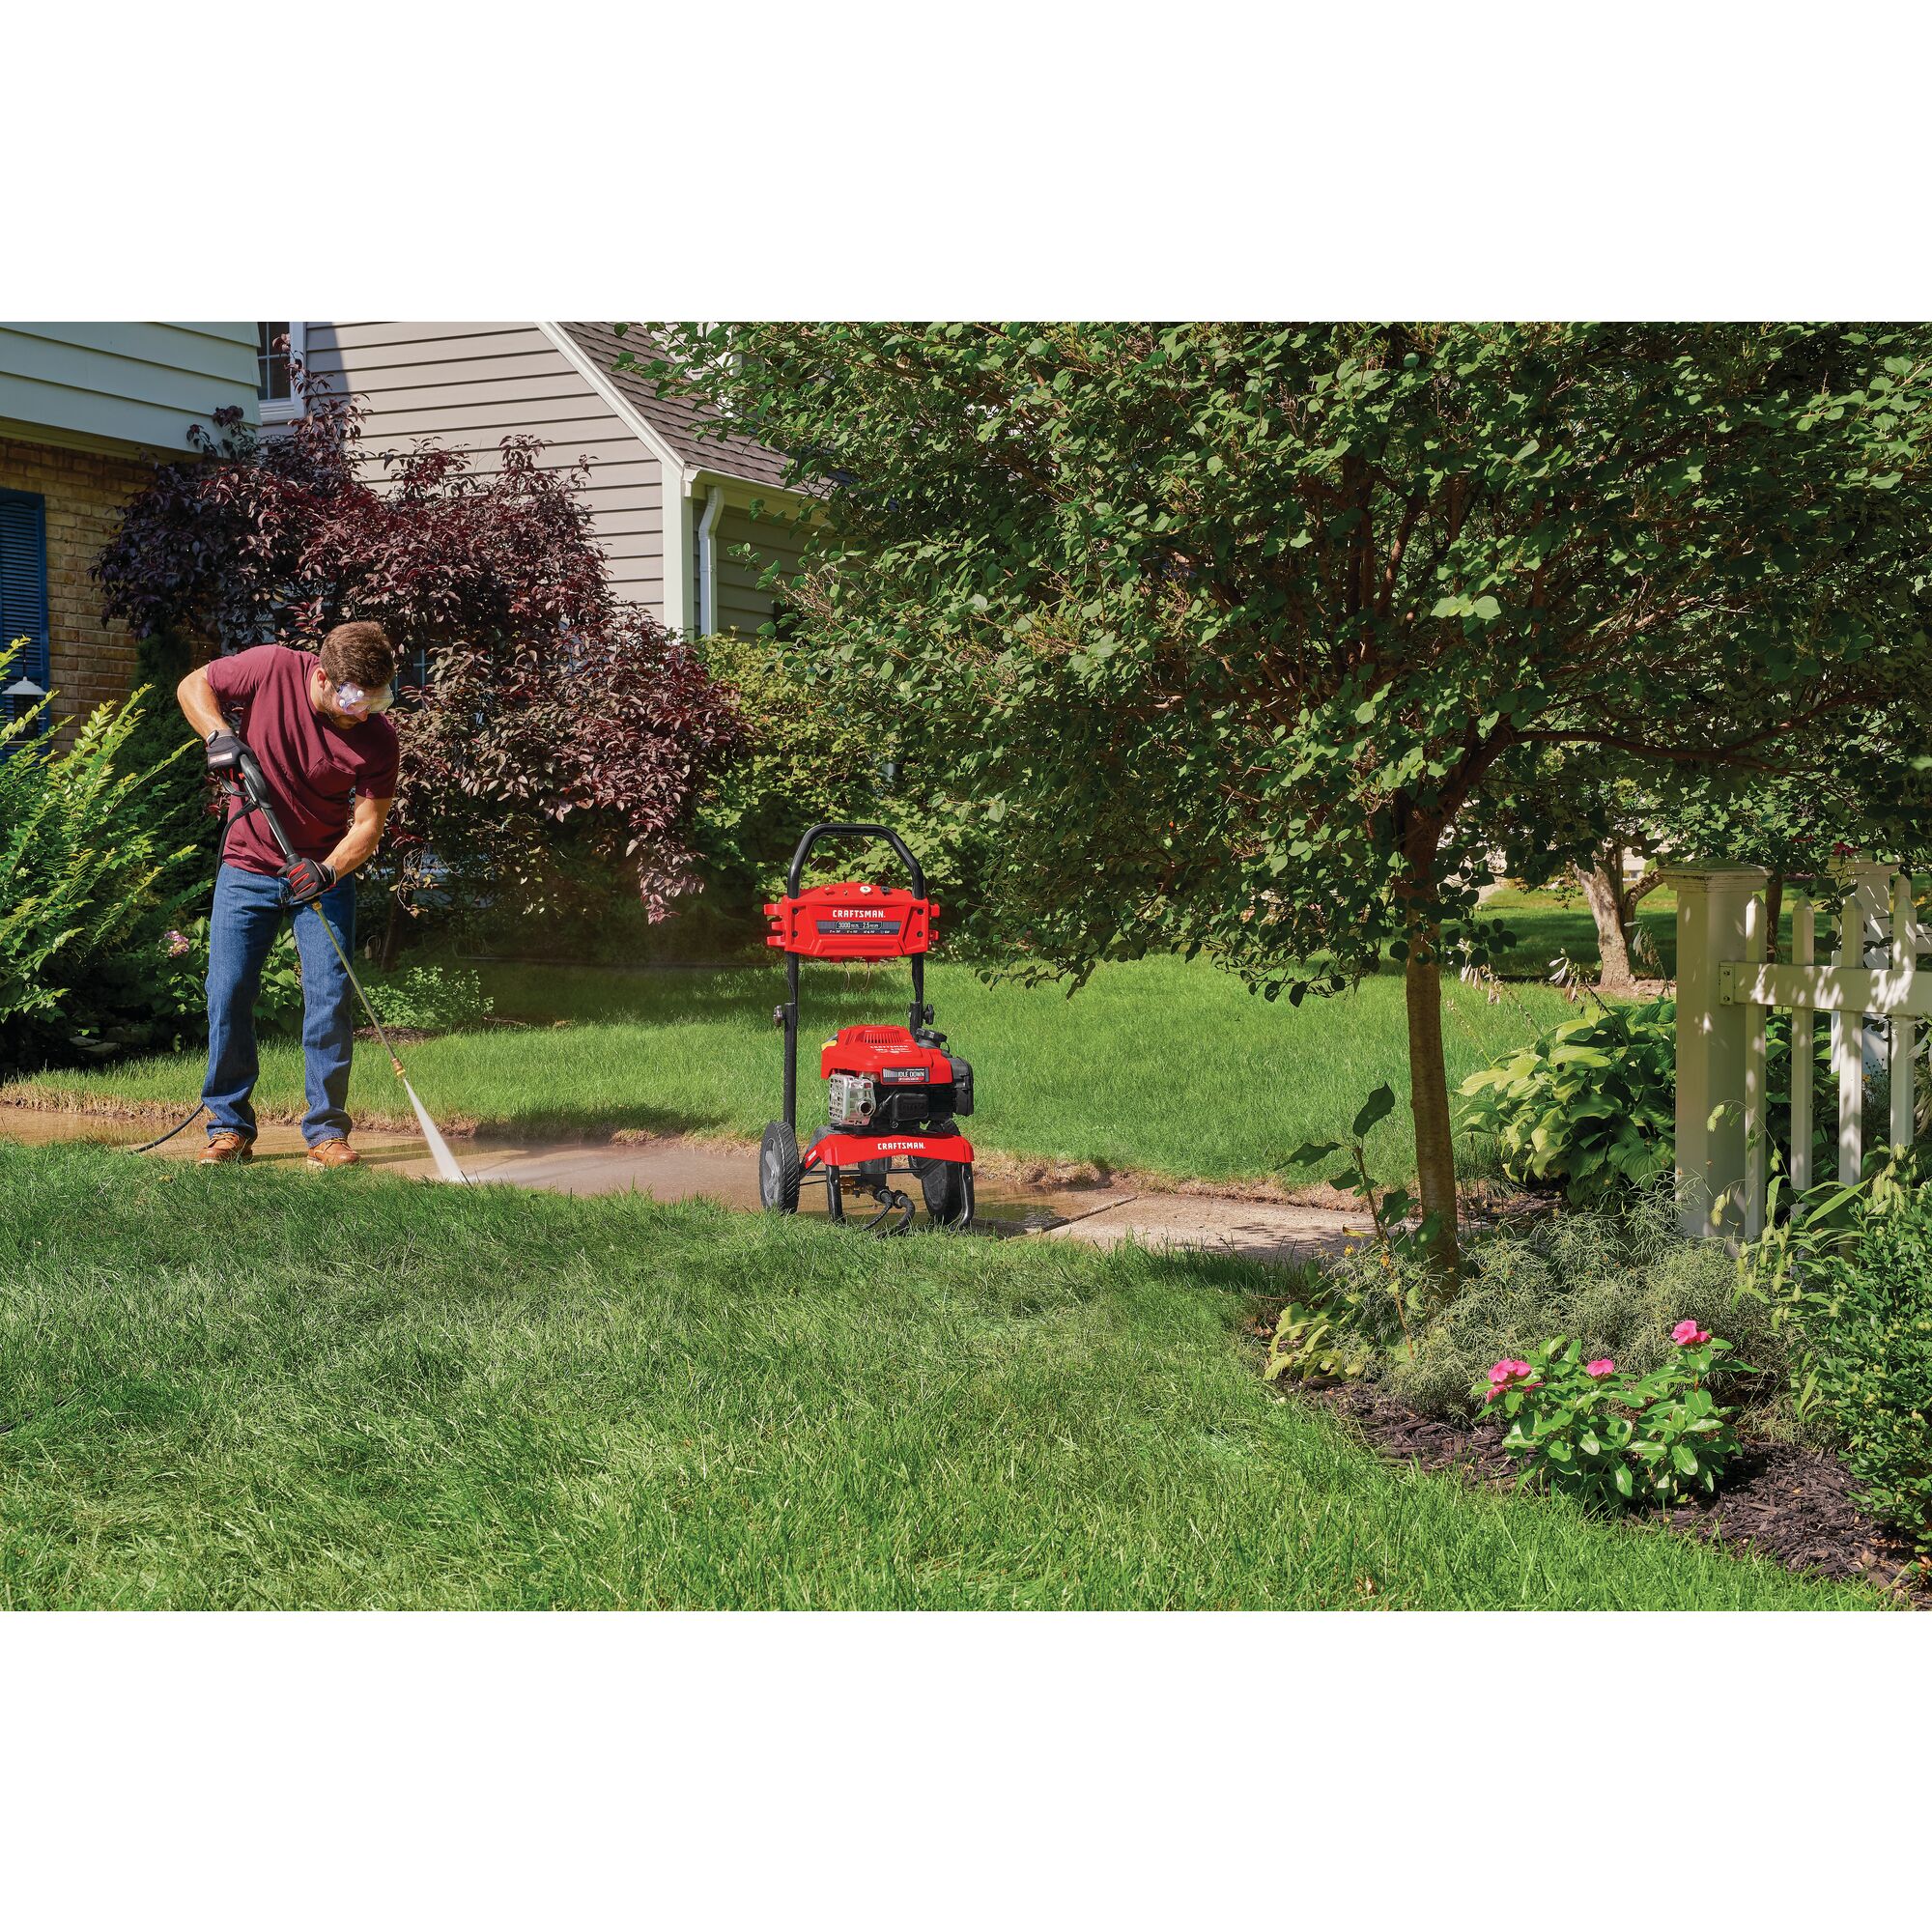 3000 MAX Pounds per Square Inch or 2 and five tenths MAX Gallons Per Minute Pressure Washer being used by person to wash pathway in lawn outdoors.